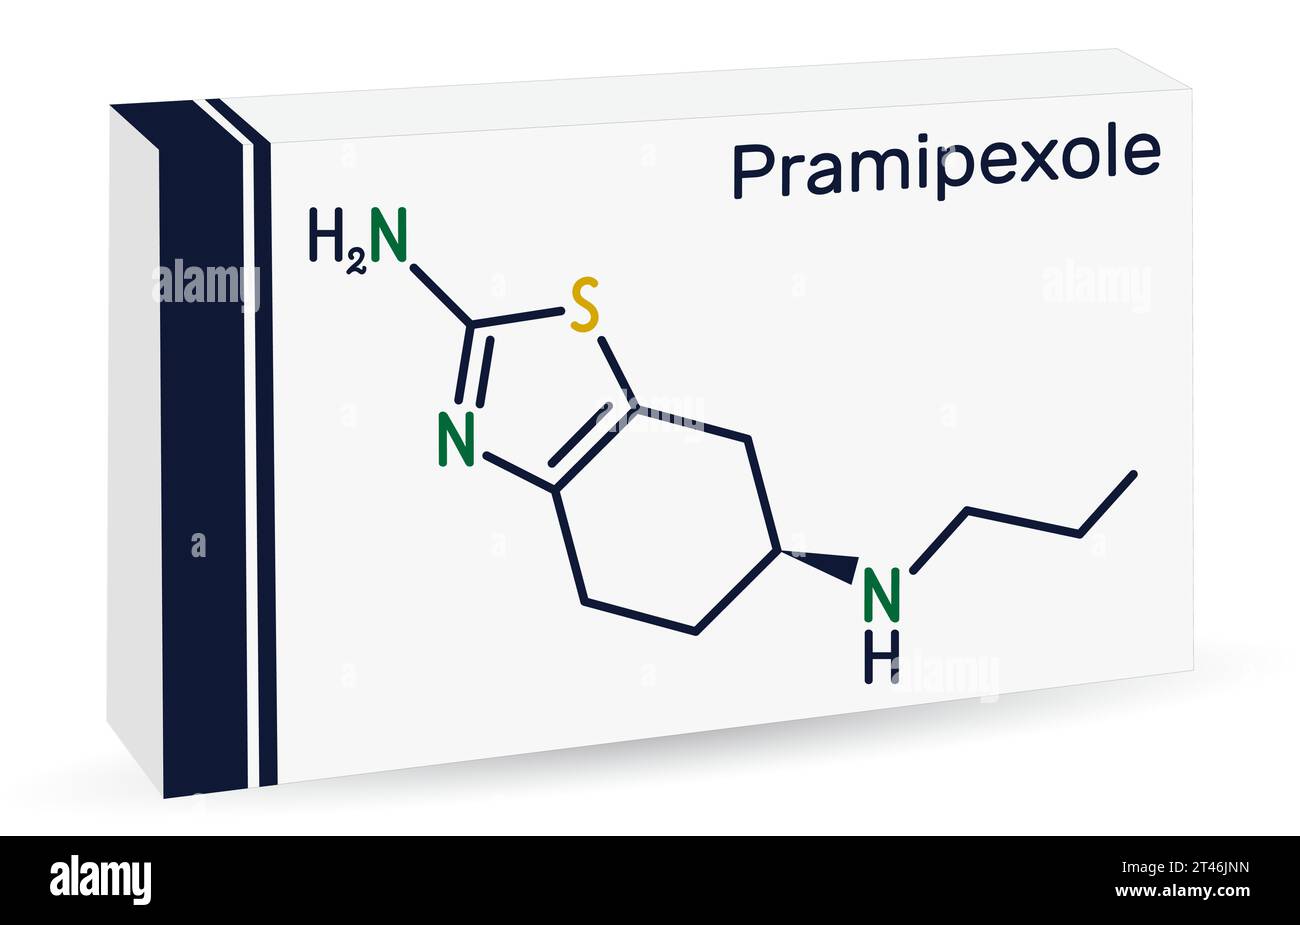 Pramipexole molecule. It is non-ergot dopamine agonist, medication used to treat Parkinson's disease. Skeletal chemical formula. Paper packaging for d Stock Vector